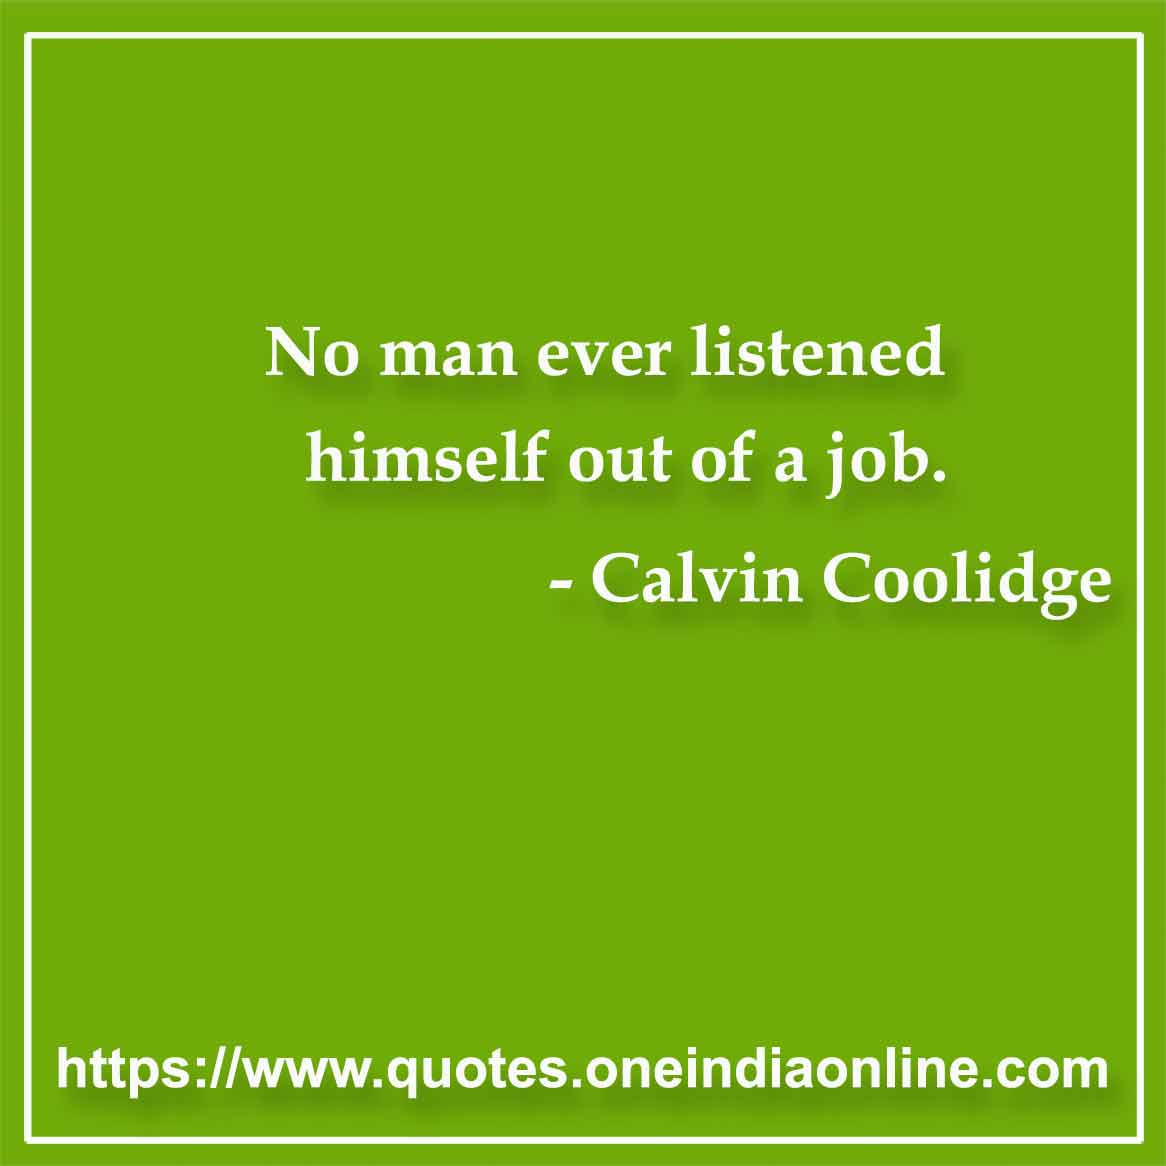 No man ever listened himself out of a job.

- Listening Quotes by Calvin Coolidge 